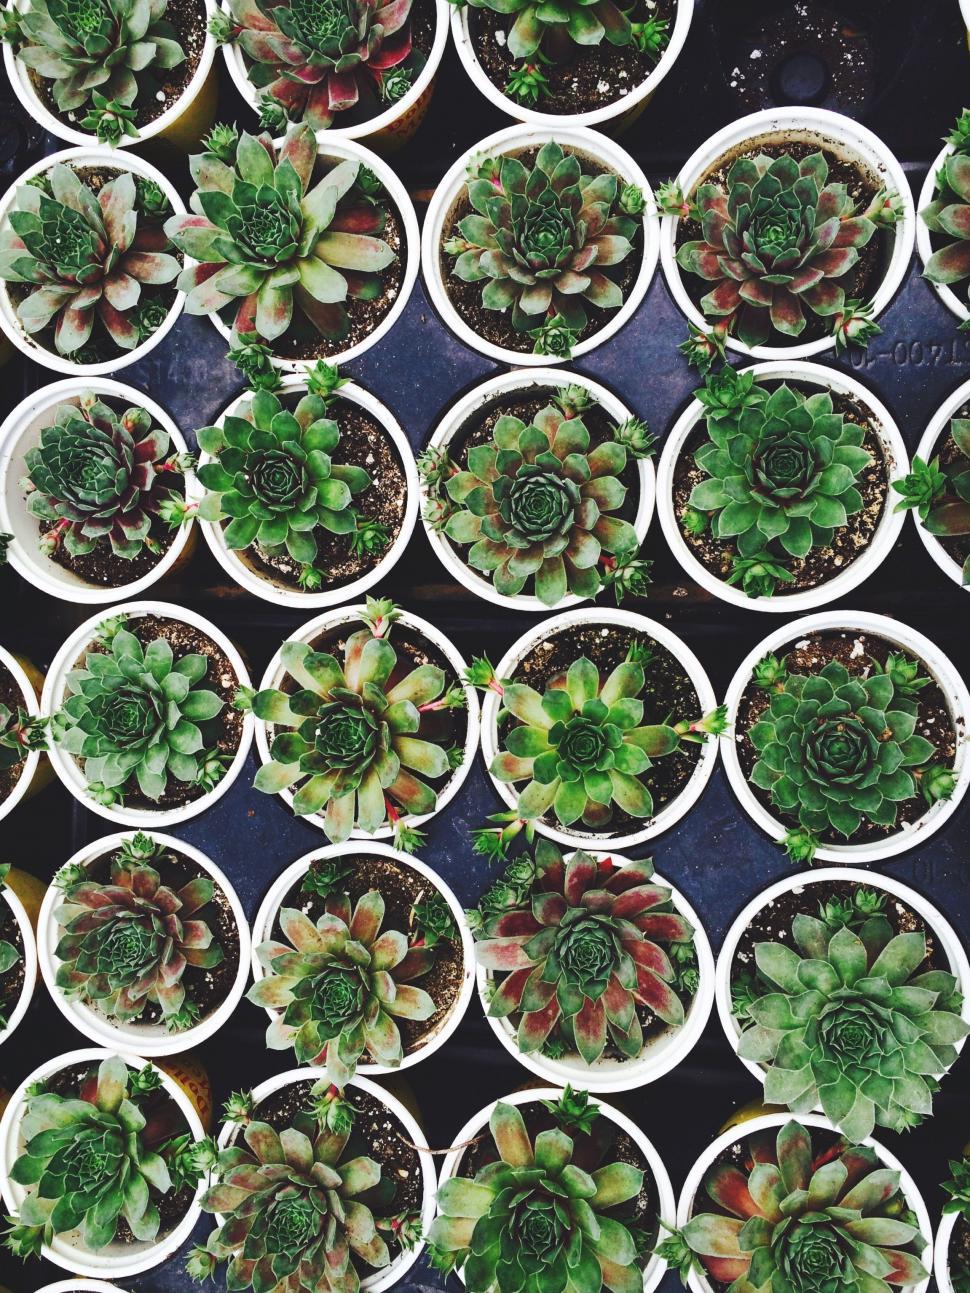 Free Image of Potted Plants Arranged on Table 